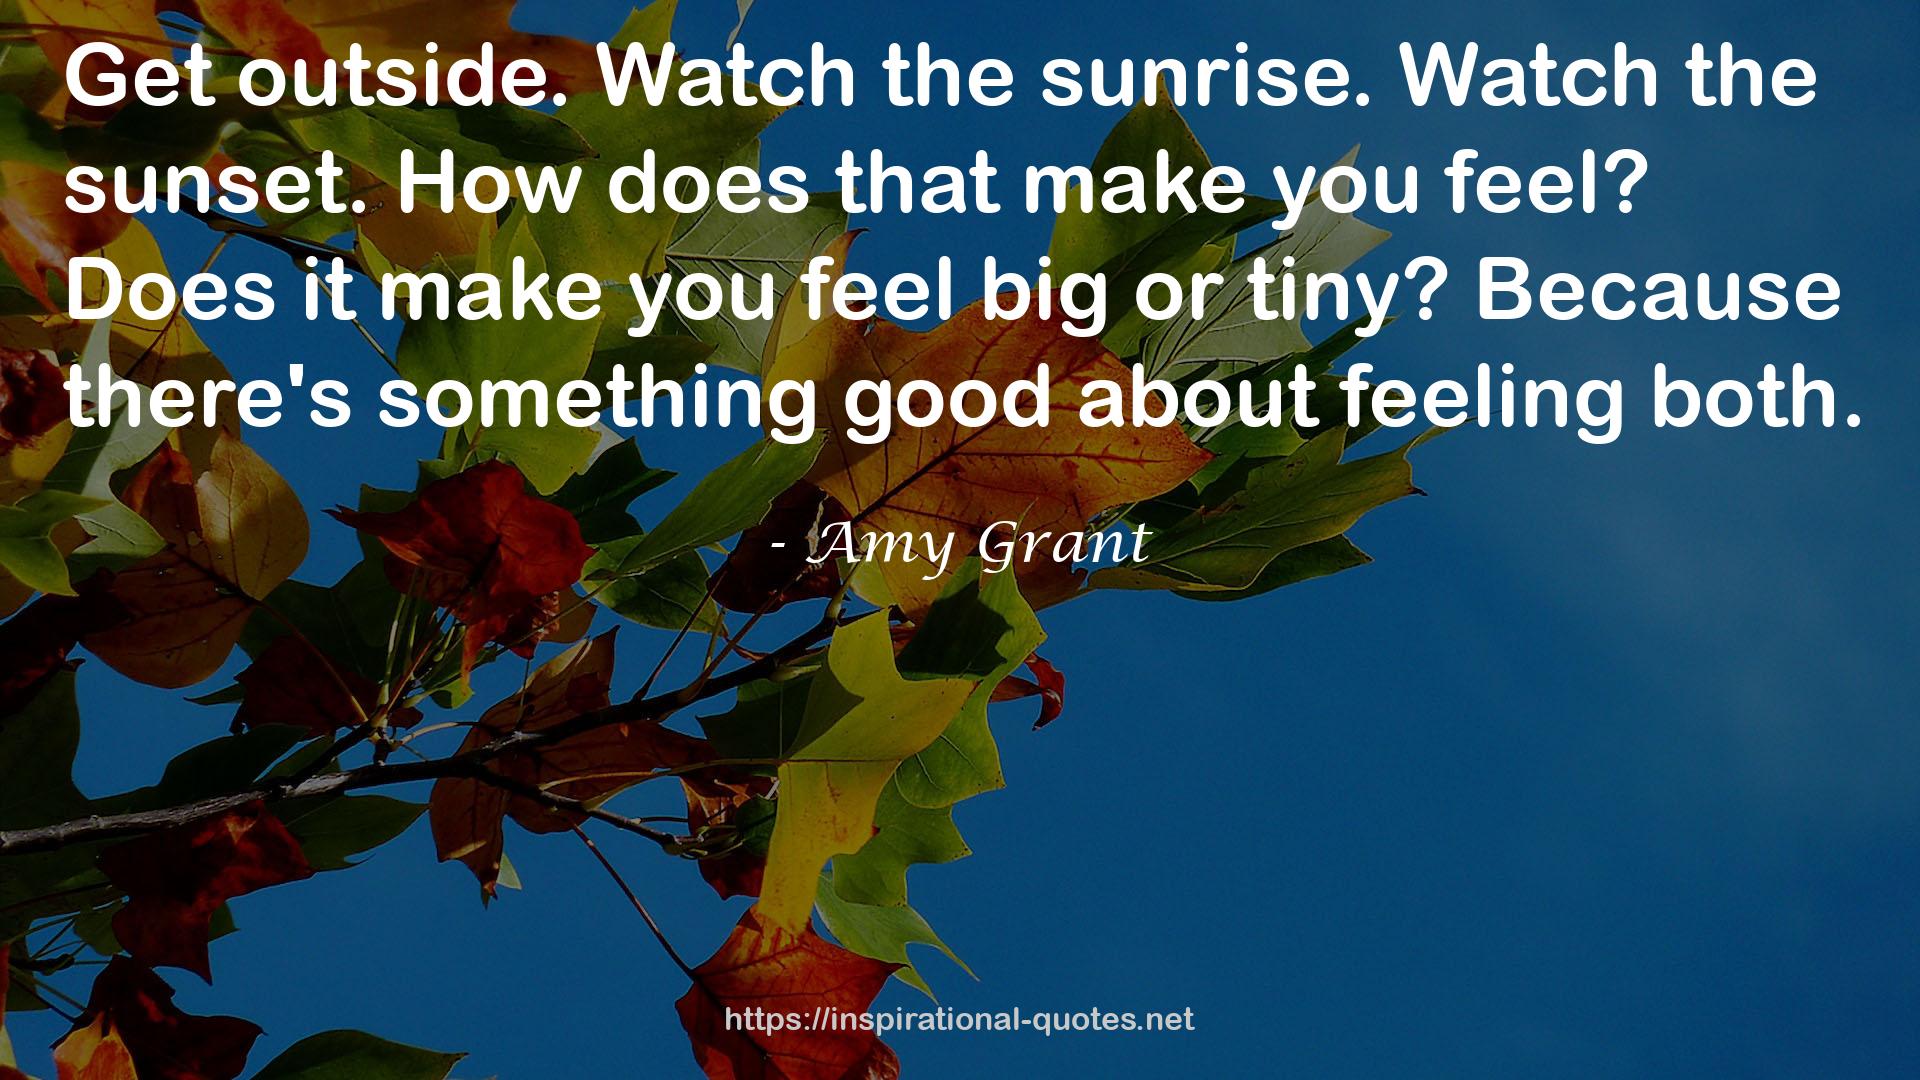 Amy Grant QUOTES